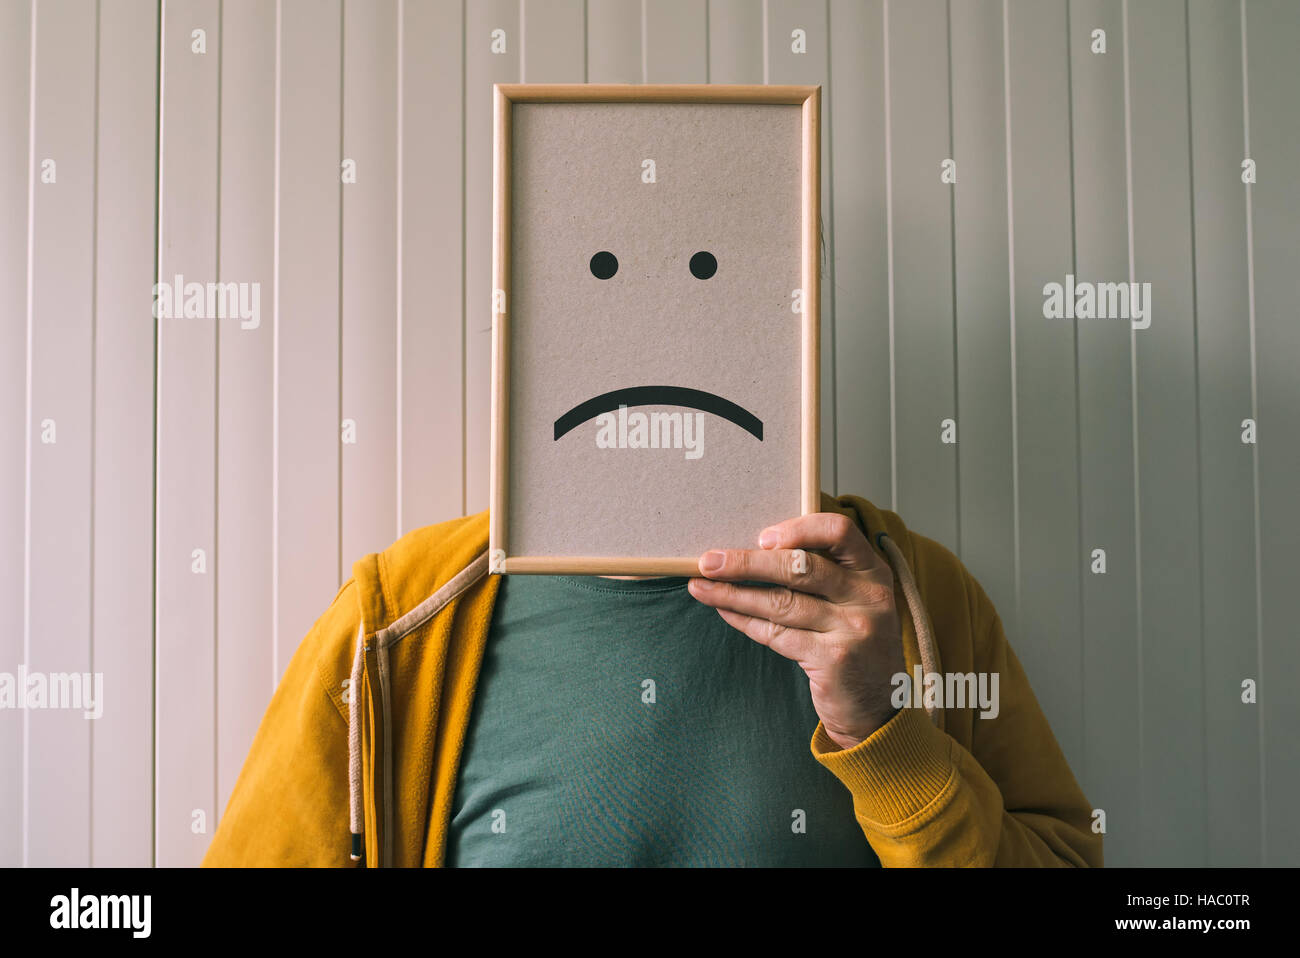 Put a sad pessimistic face on, sadness and depressive emotions concept, man holding picture frame with smiley emoticon printed Stock Photo